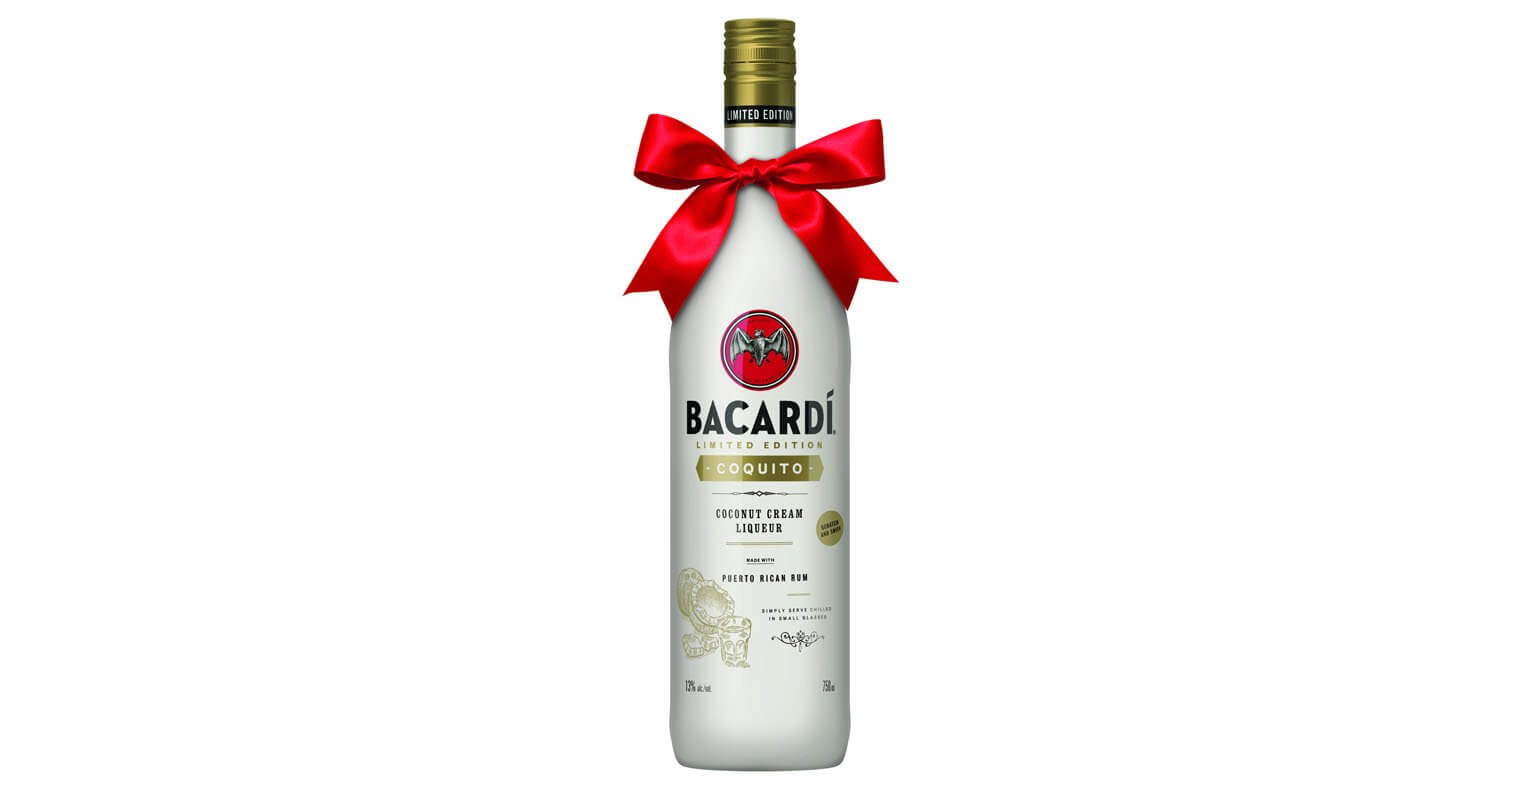 BACARDÍ Coquito with bow, featured image